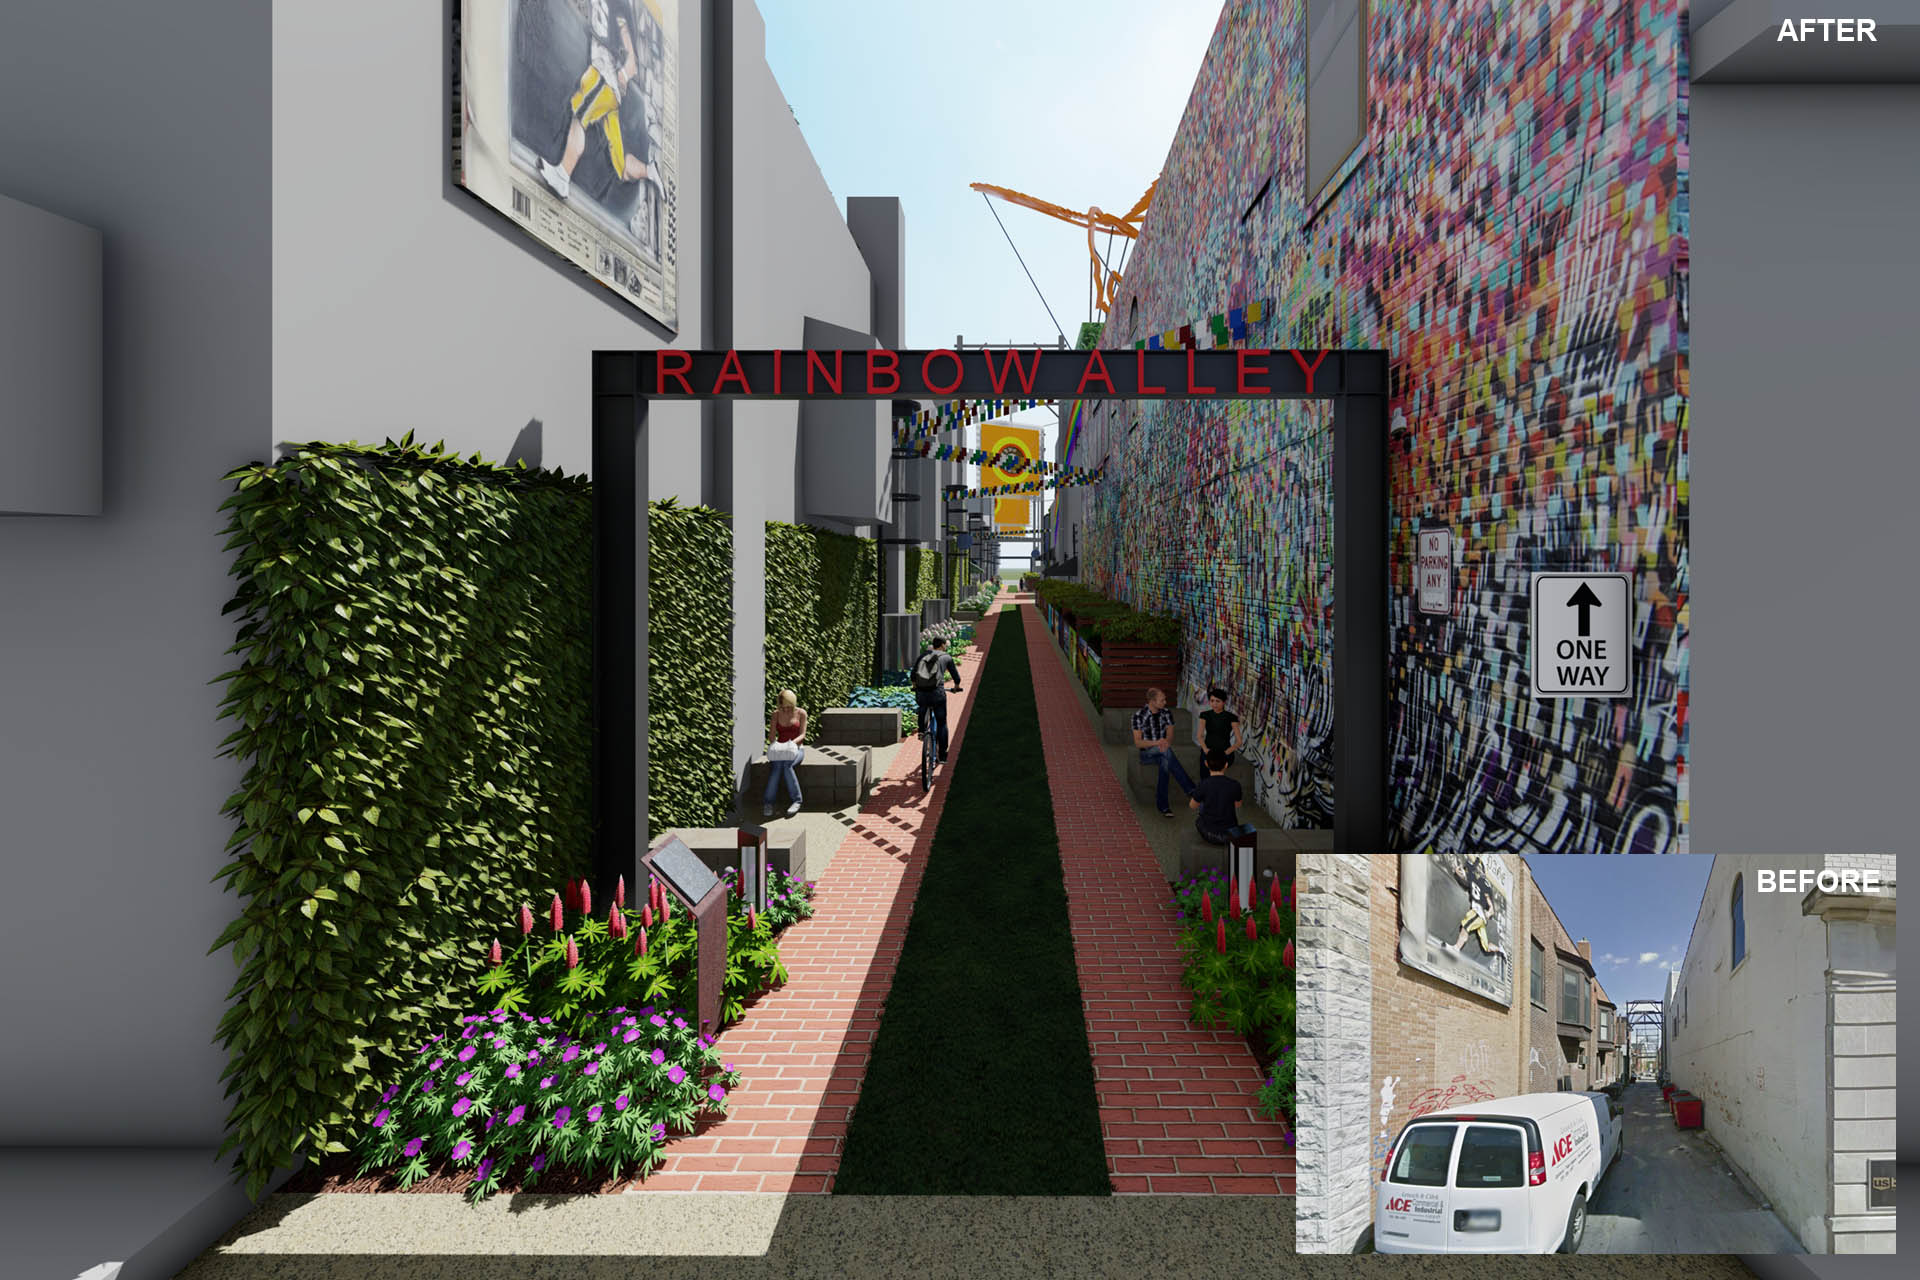 ICDD Alley Revitalization Proposal